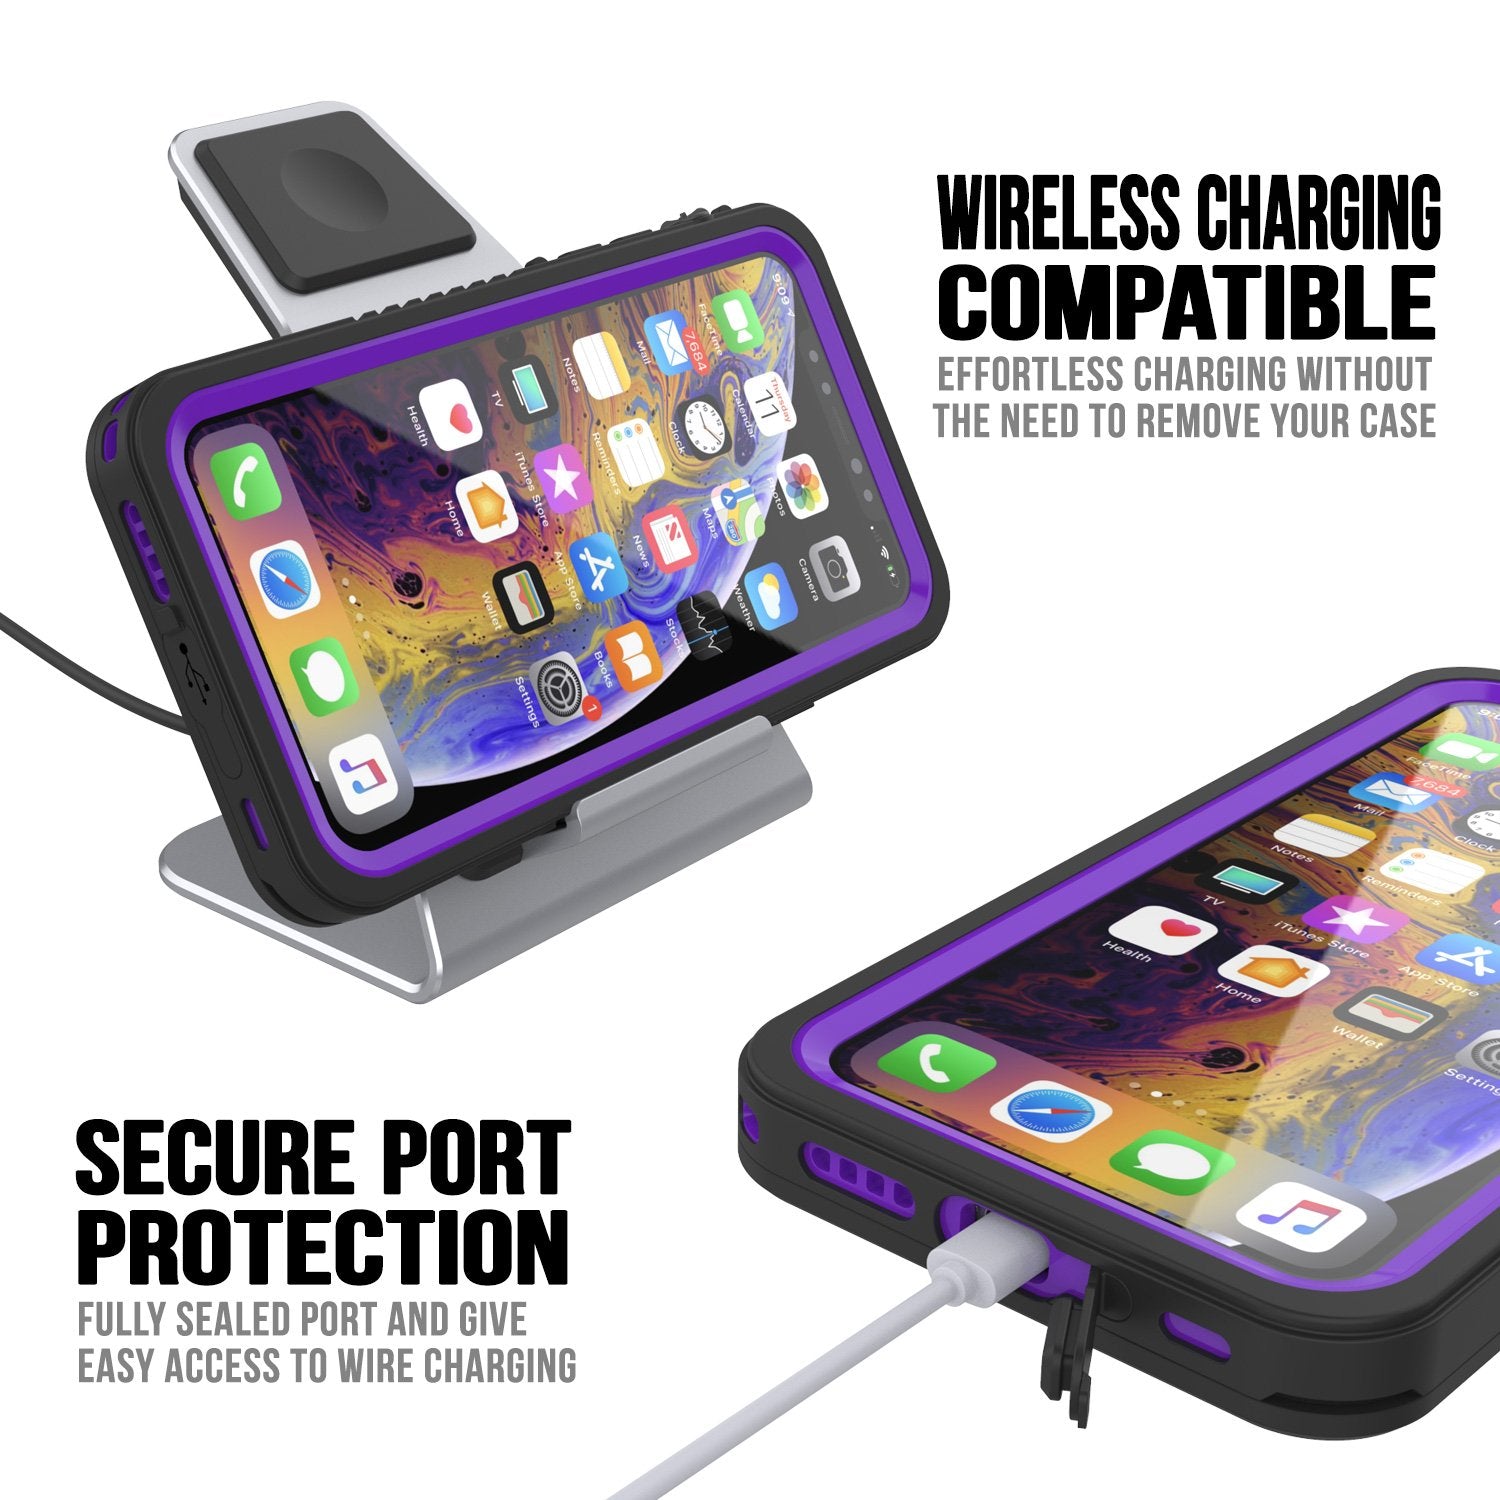 iPhone 11 Waterproof Case, Punkcase [Extreme Series] Armor Cover W/ Built In Screen Protector [Purple]